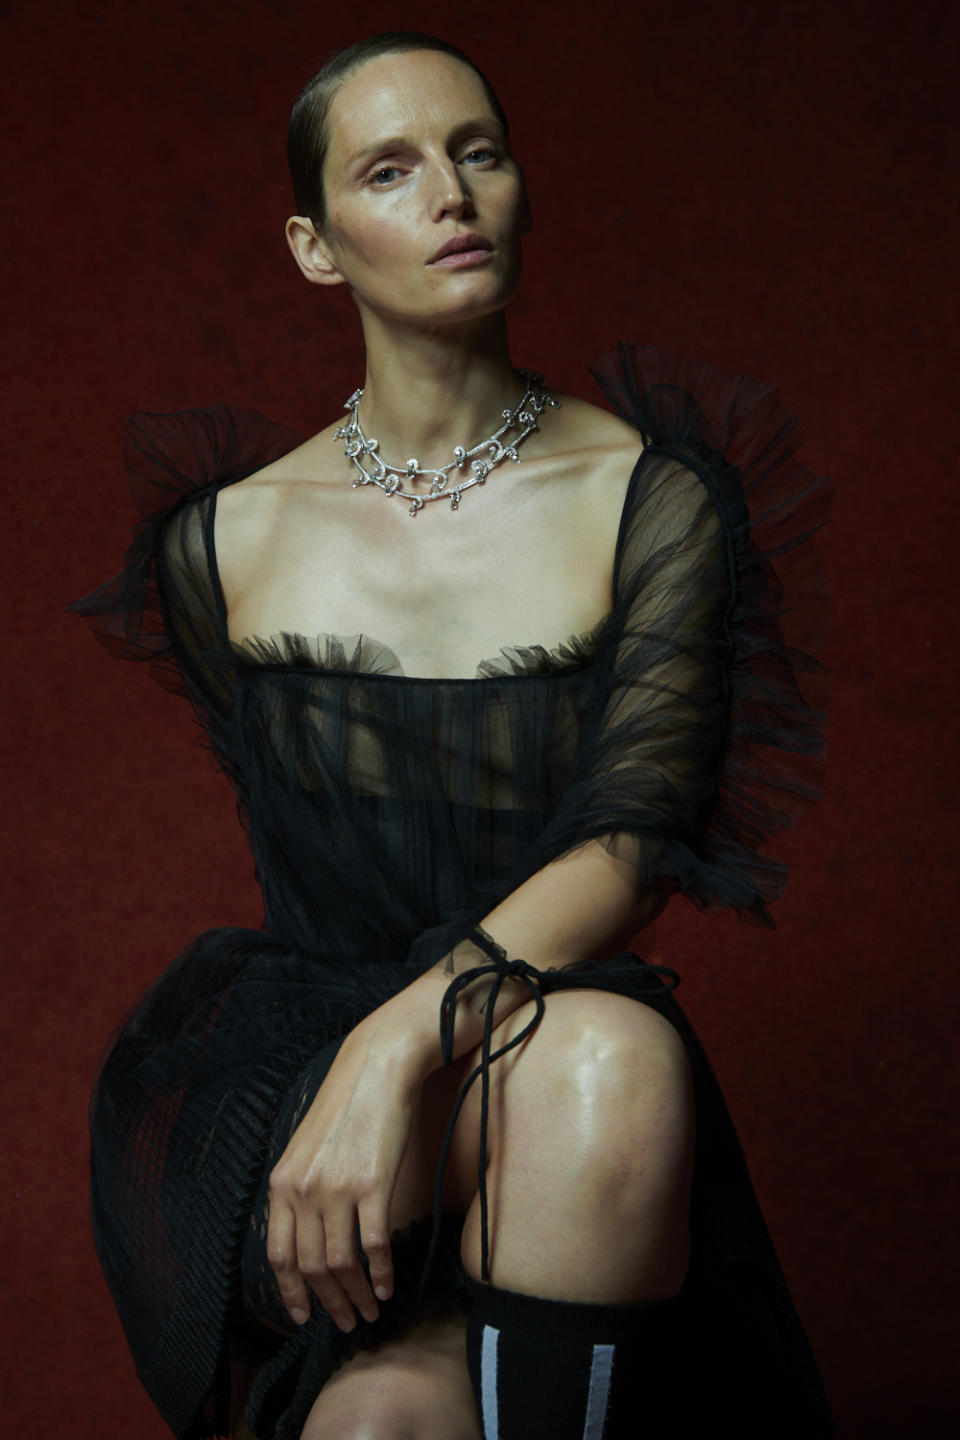 Salini’s jewels worn by Vivien Solari, photographed by Damian Foxe.